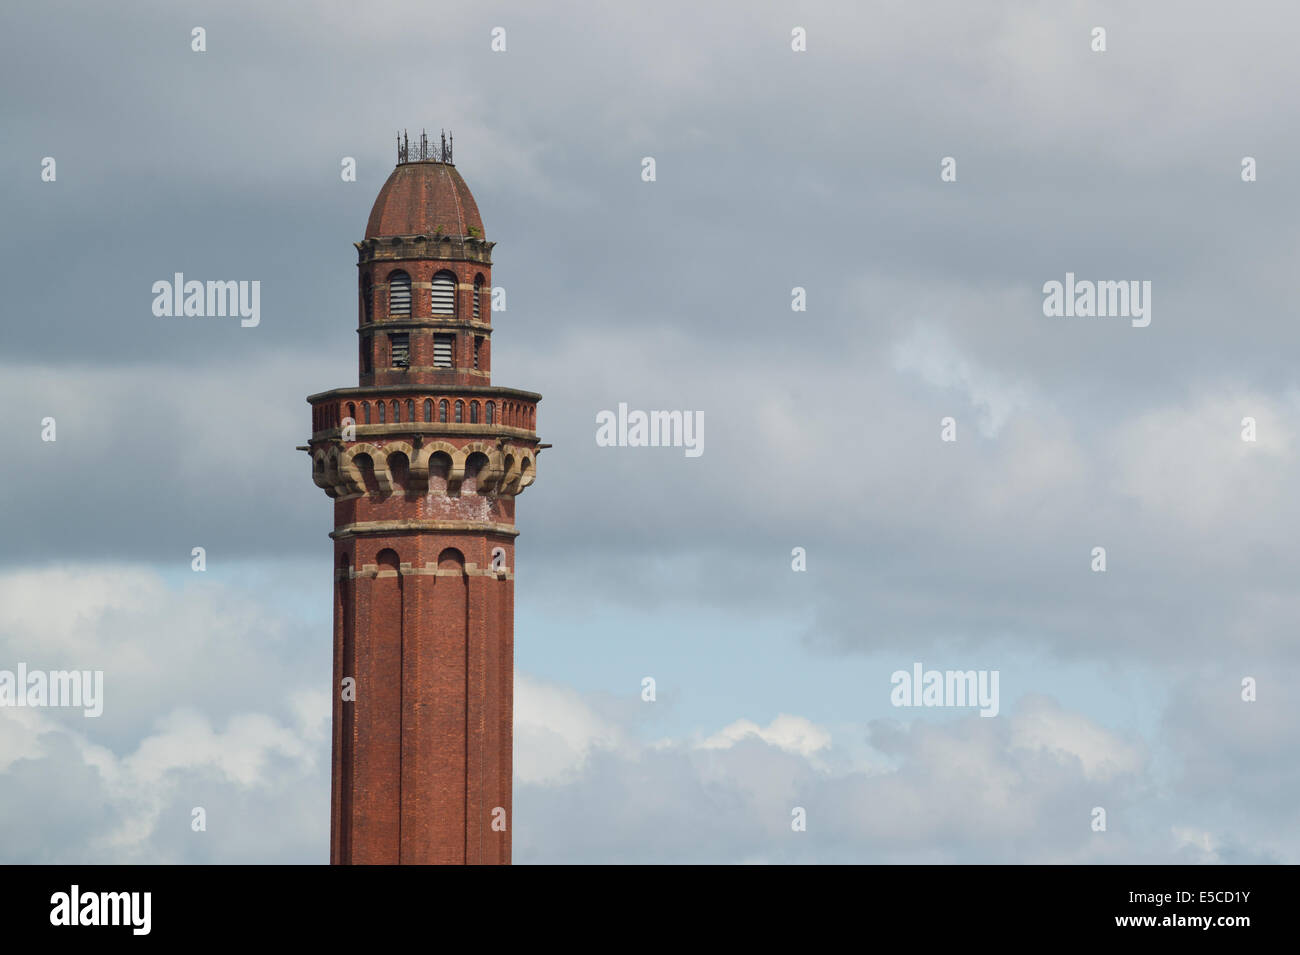 The ventilation tower HM Prison Manchester high-security male prison, formerly known as Strangeways. Stock Photo